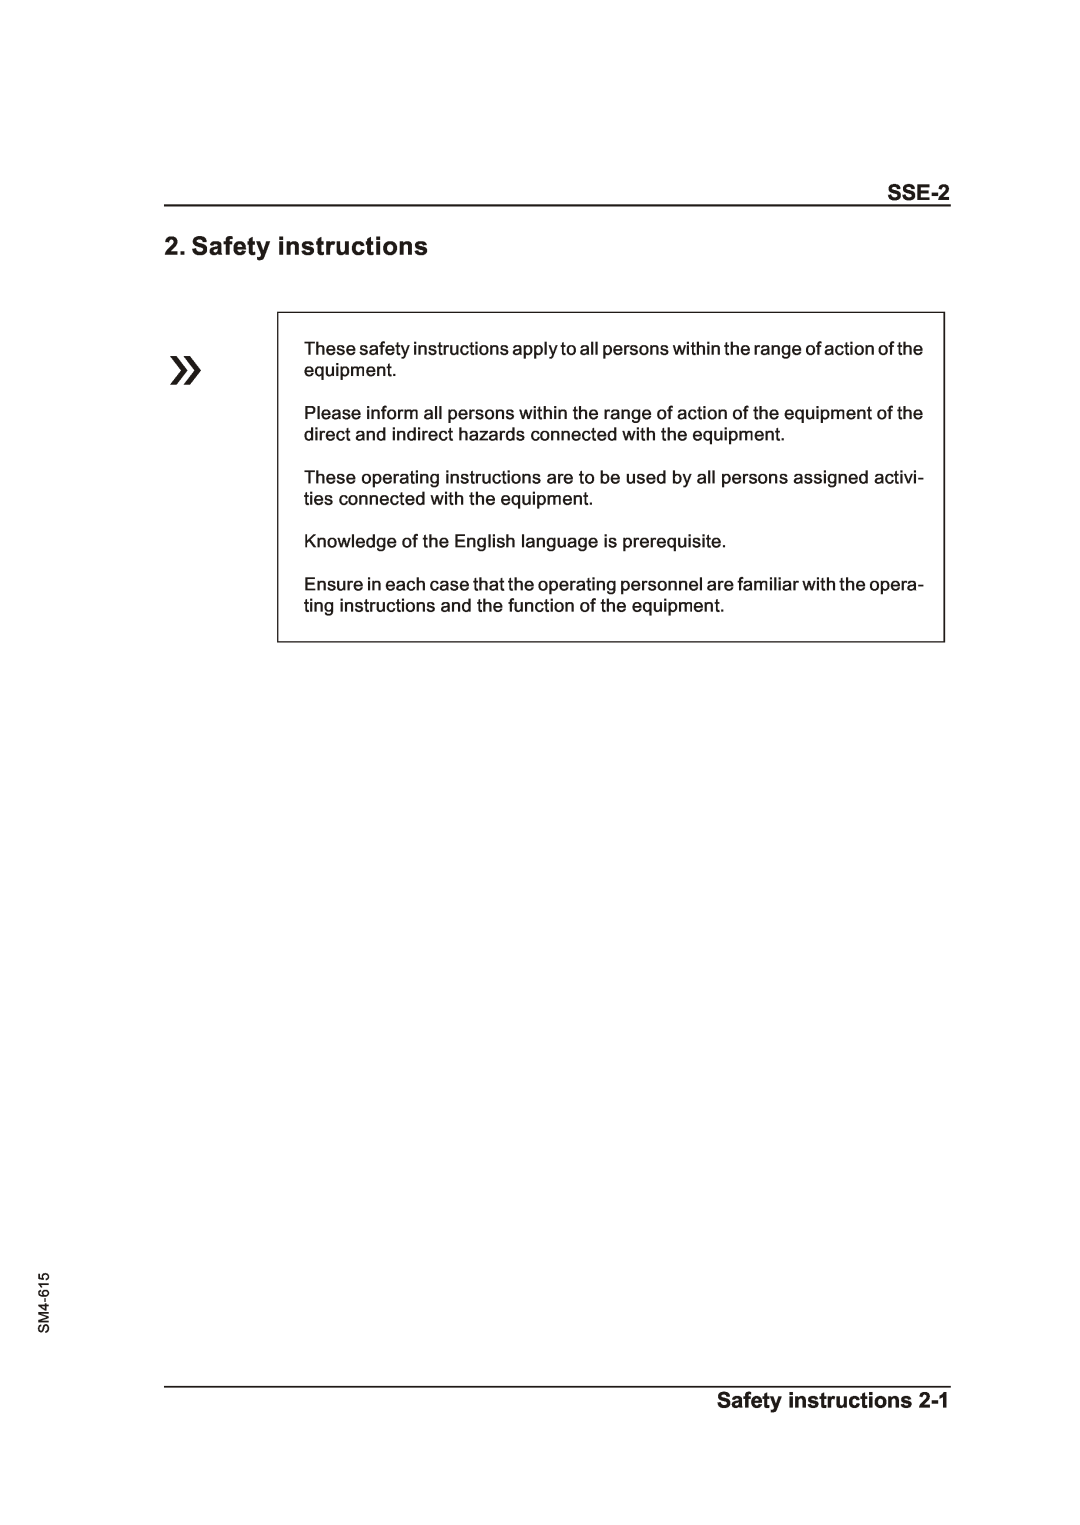 Sterling SSE-2 operating instructions Safety instructions 